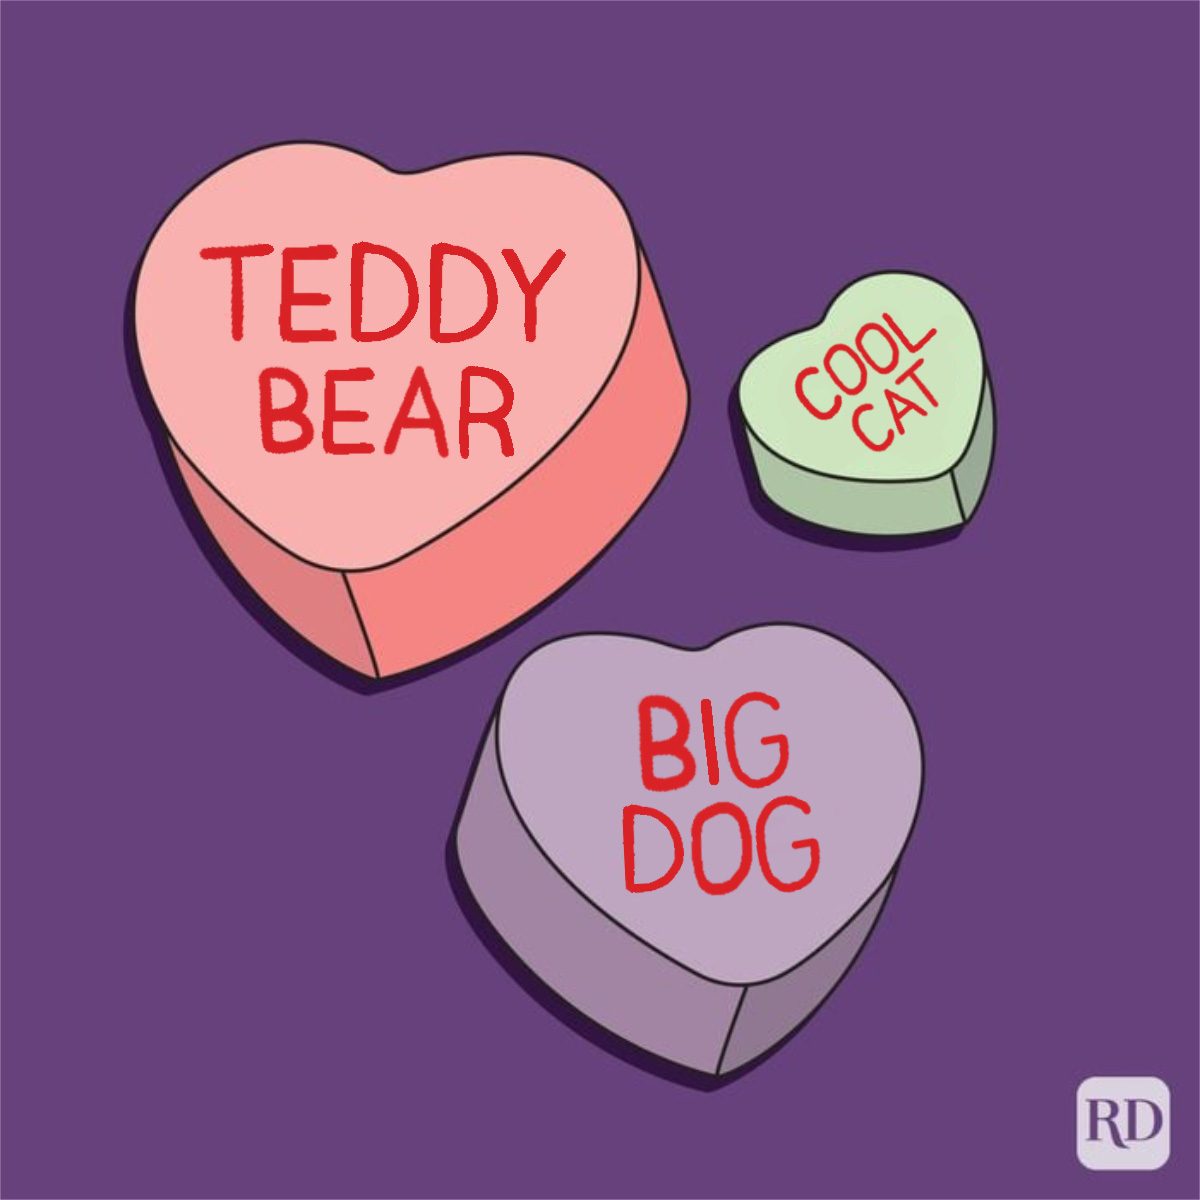 A Valentine's Candy Classic: Sweethearts Conversation Hearts!